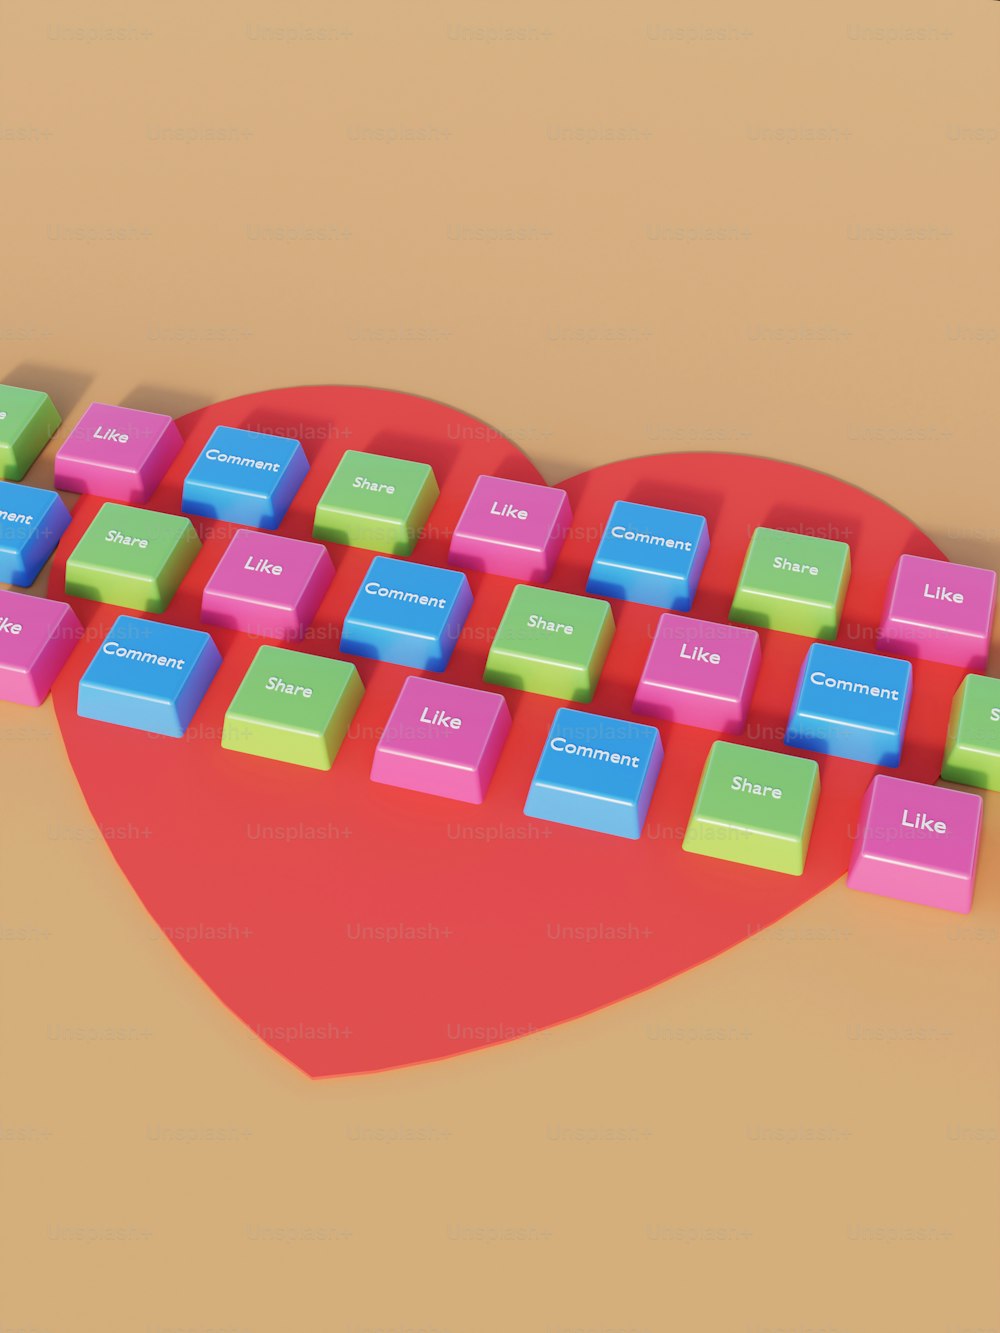 a heart shaped computer keyboard sitting on top of a table